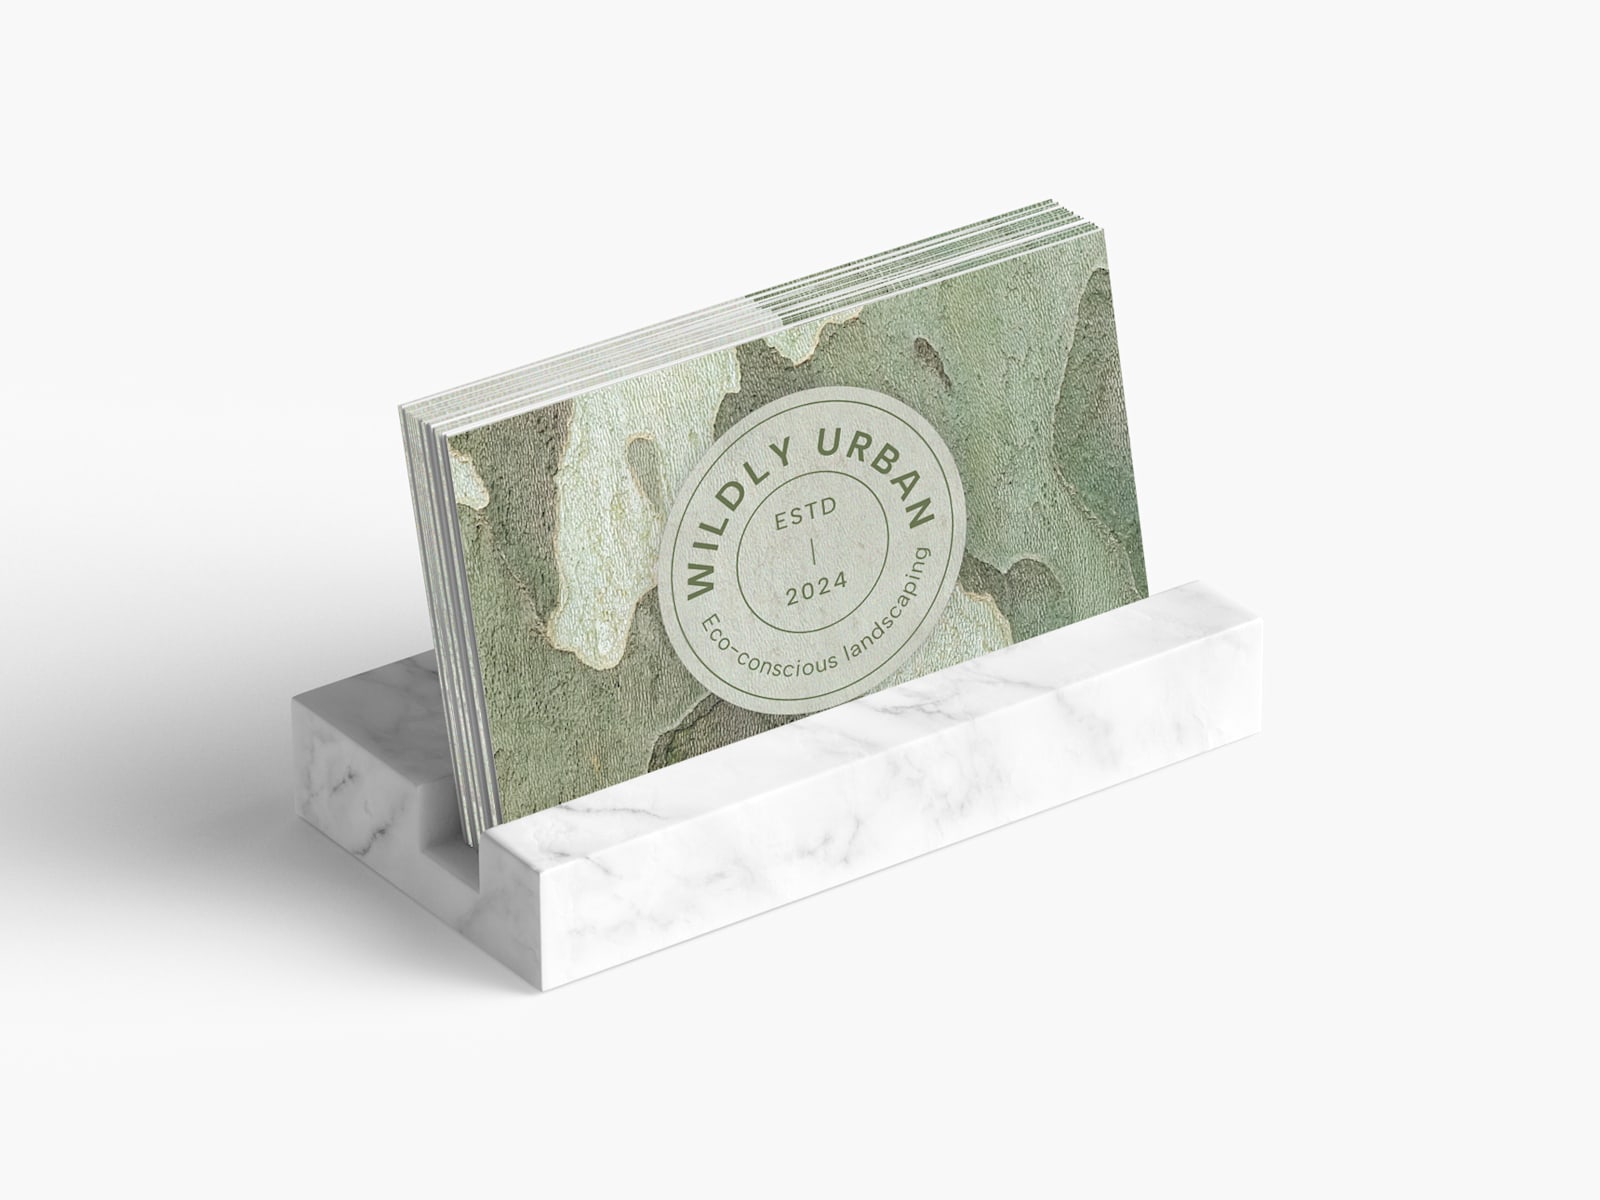 A standard business card sits in a marble business card holder.